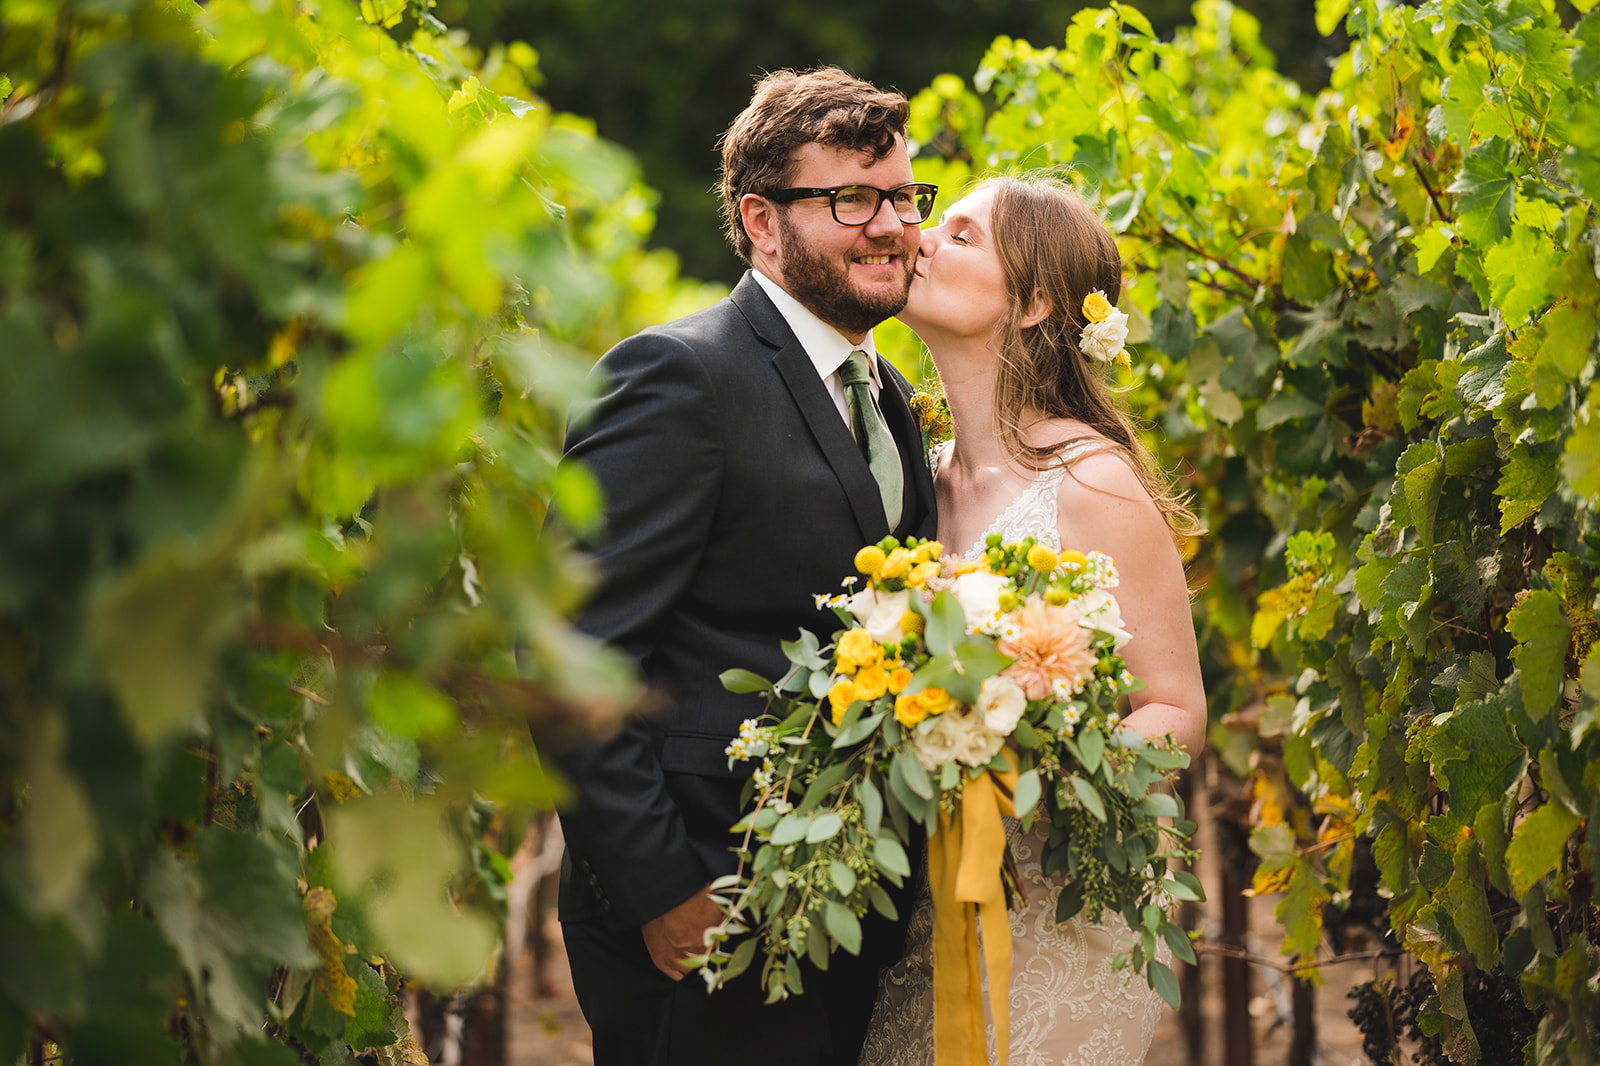 Newlyweds sharing a romantic moment among vineyards in Napa Valley